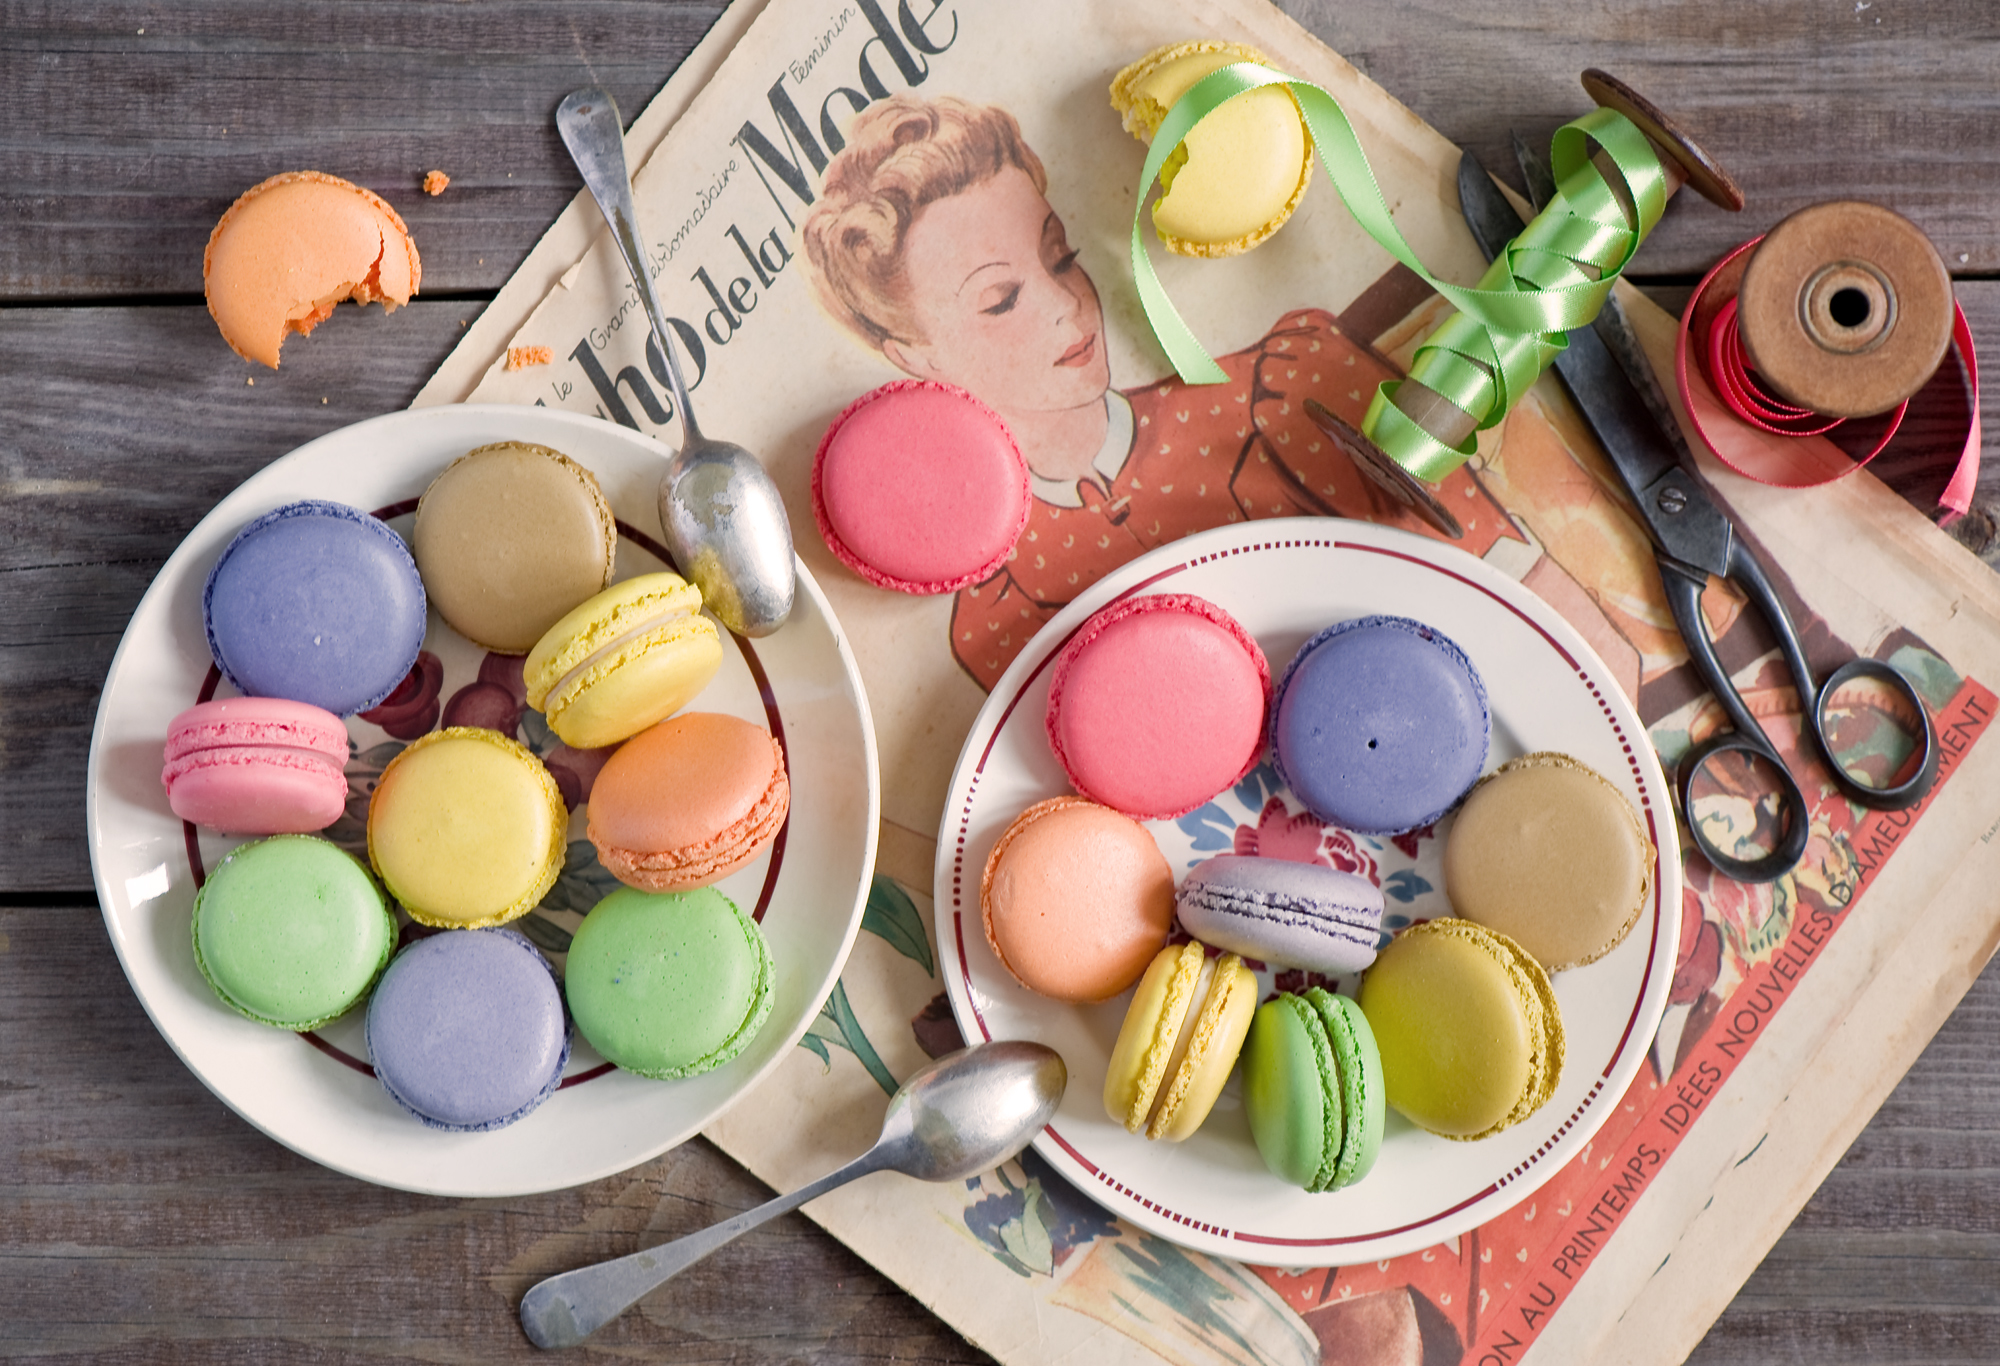 Two plates of colored macarons